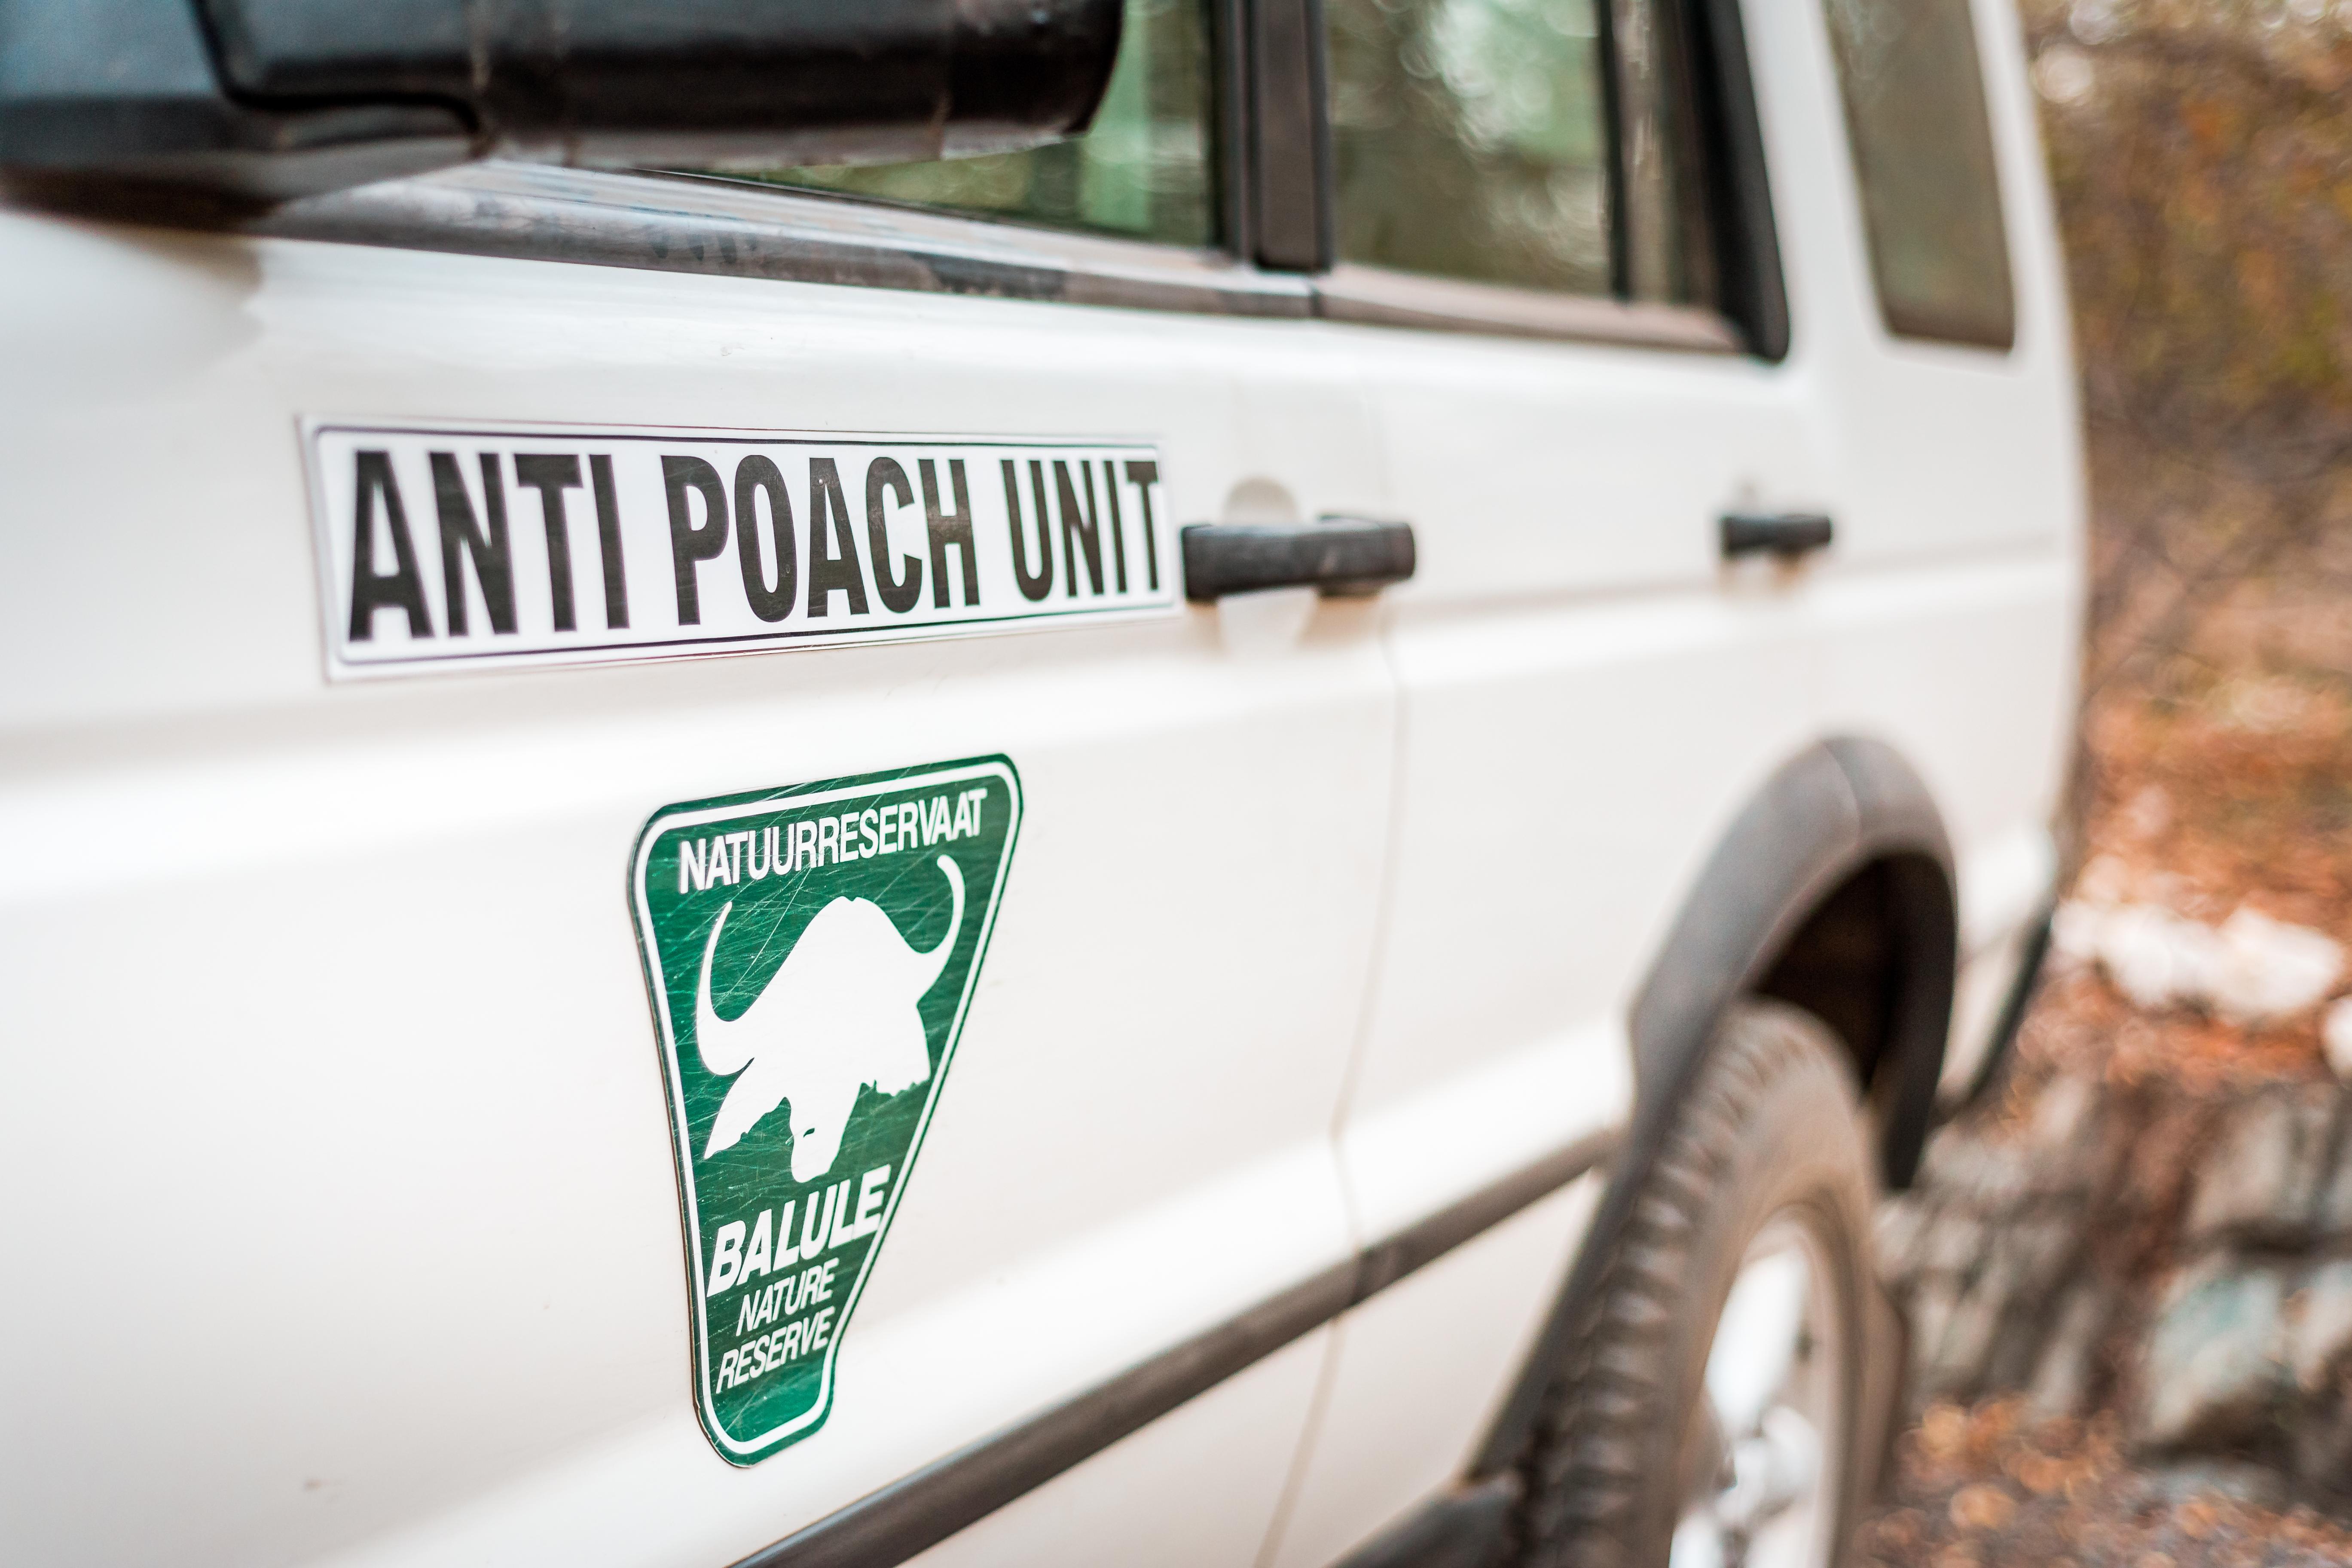 Kruger National Park, South Africa - 07 23 2016 - White SUV of the Anti Poach Unit, Association against poaching in Africa